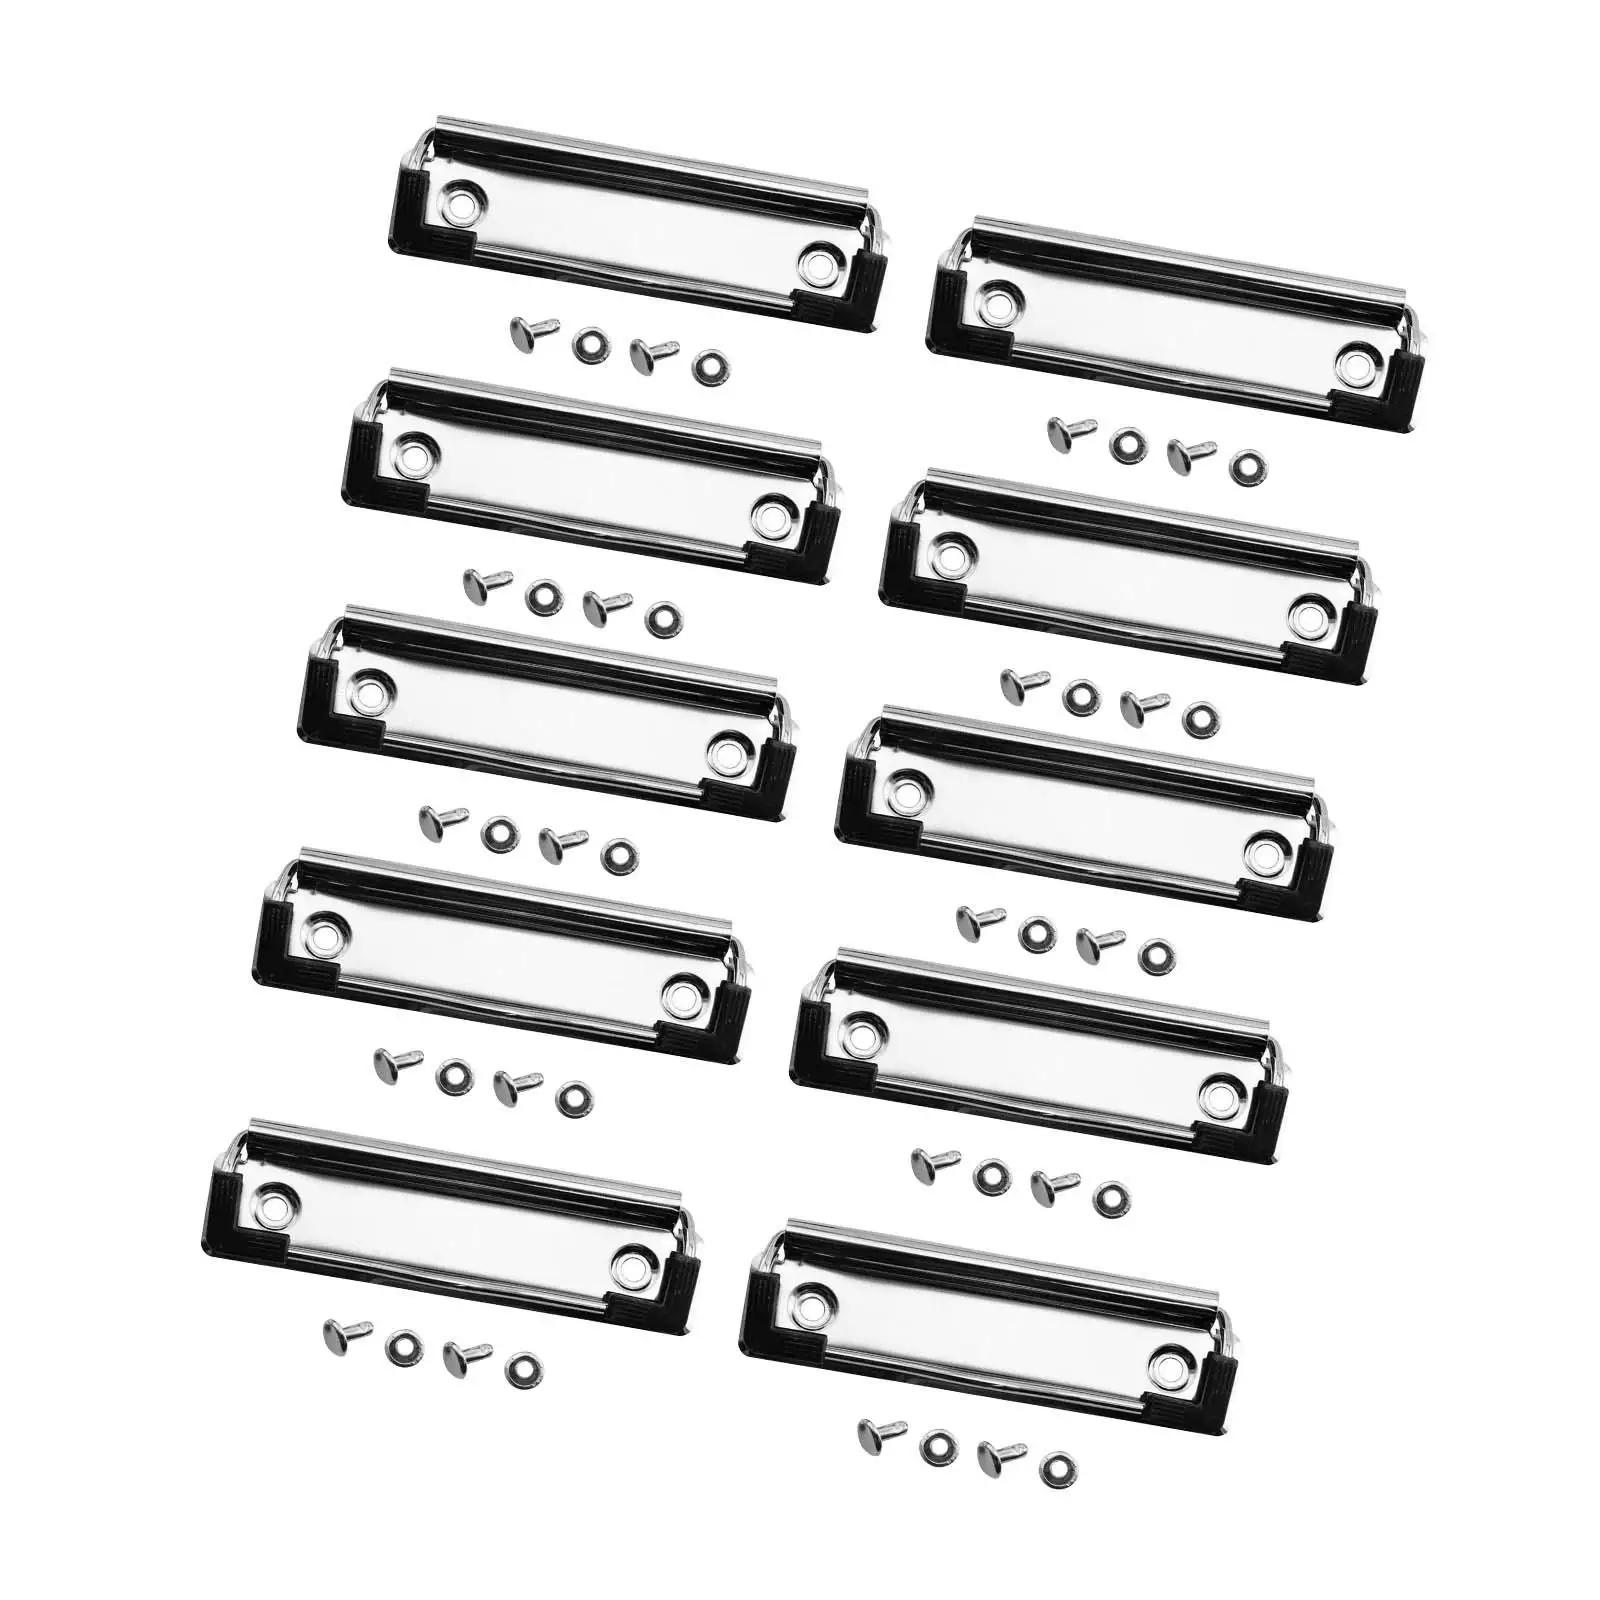 10x Mountable Clipboard Clips Iron Lightweight with Rubber Feet Document File Board Clips for Stationery Supplies Business Class